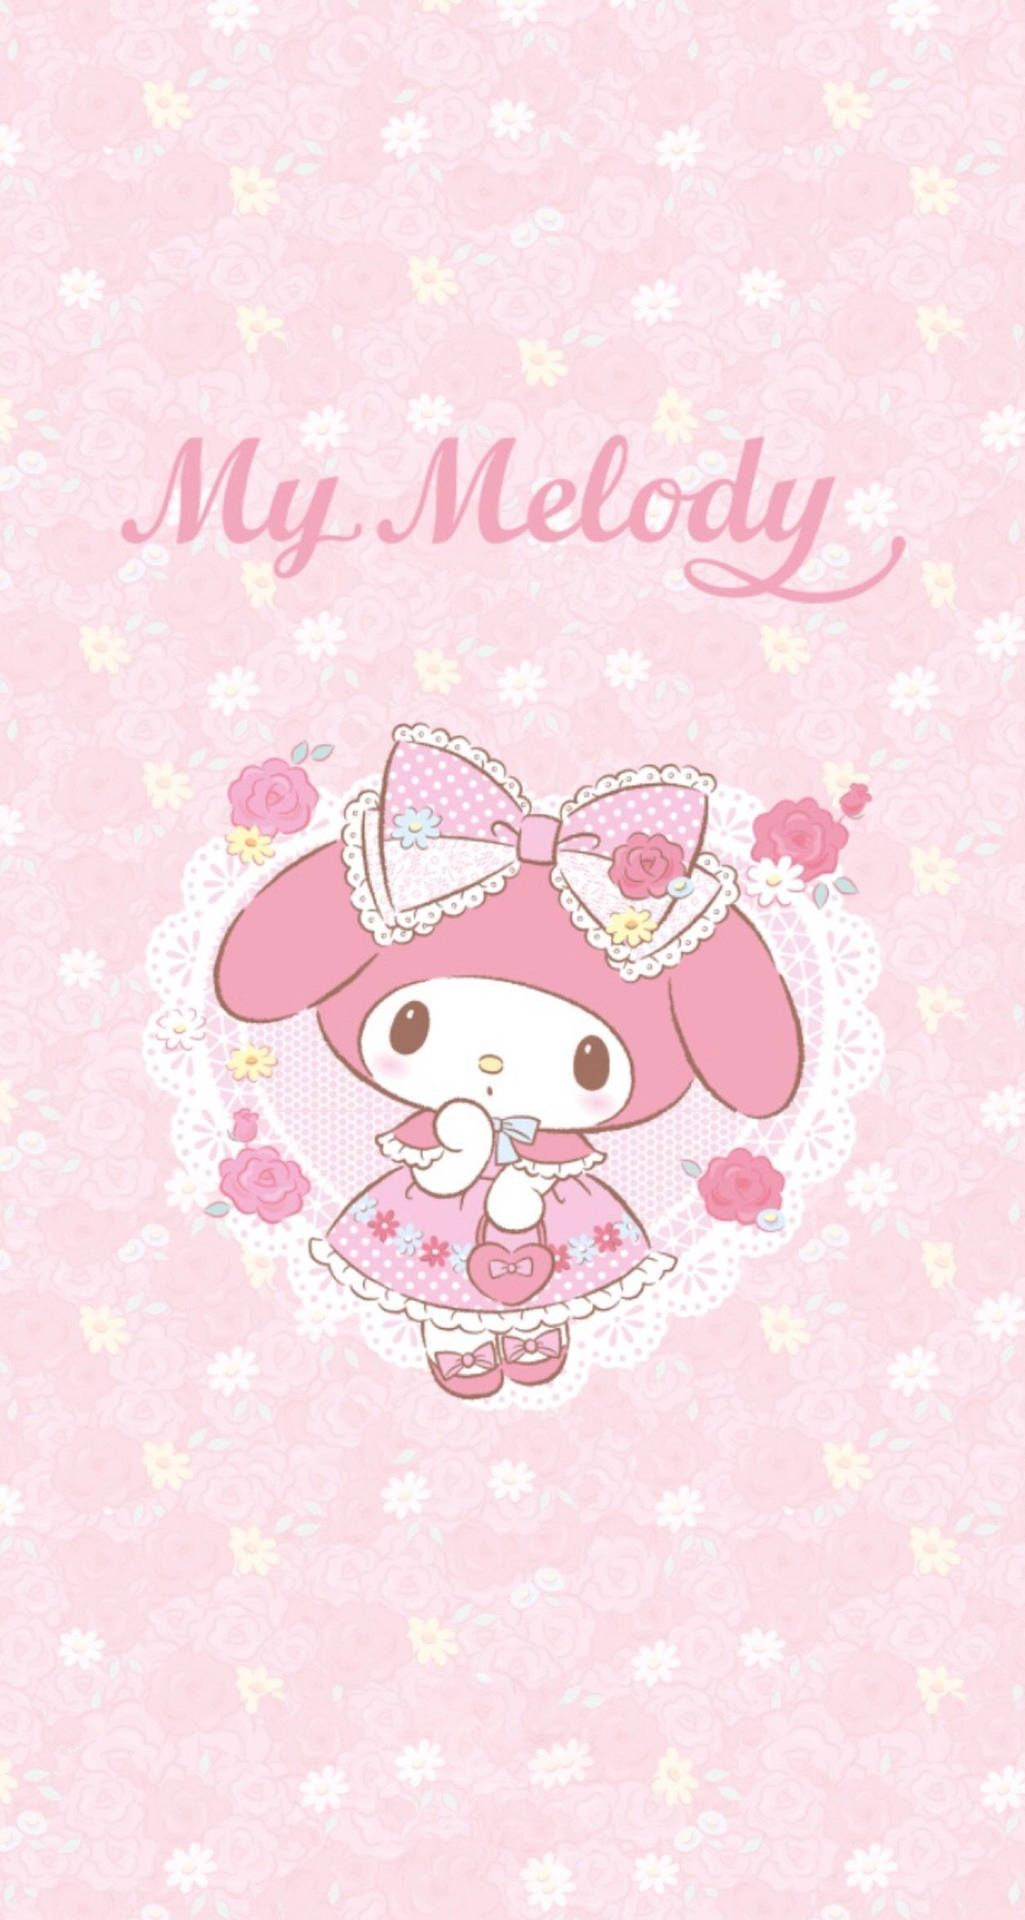 My Melody in a pink dress enjoying a beautiful day Wallpaper